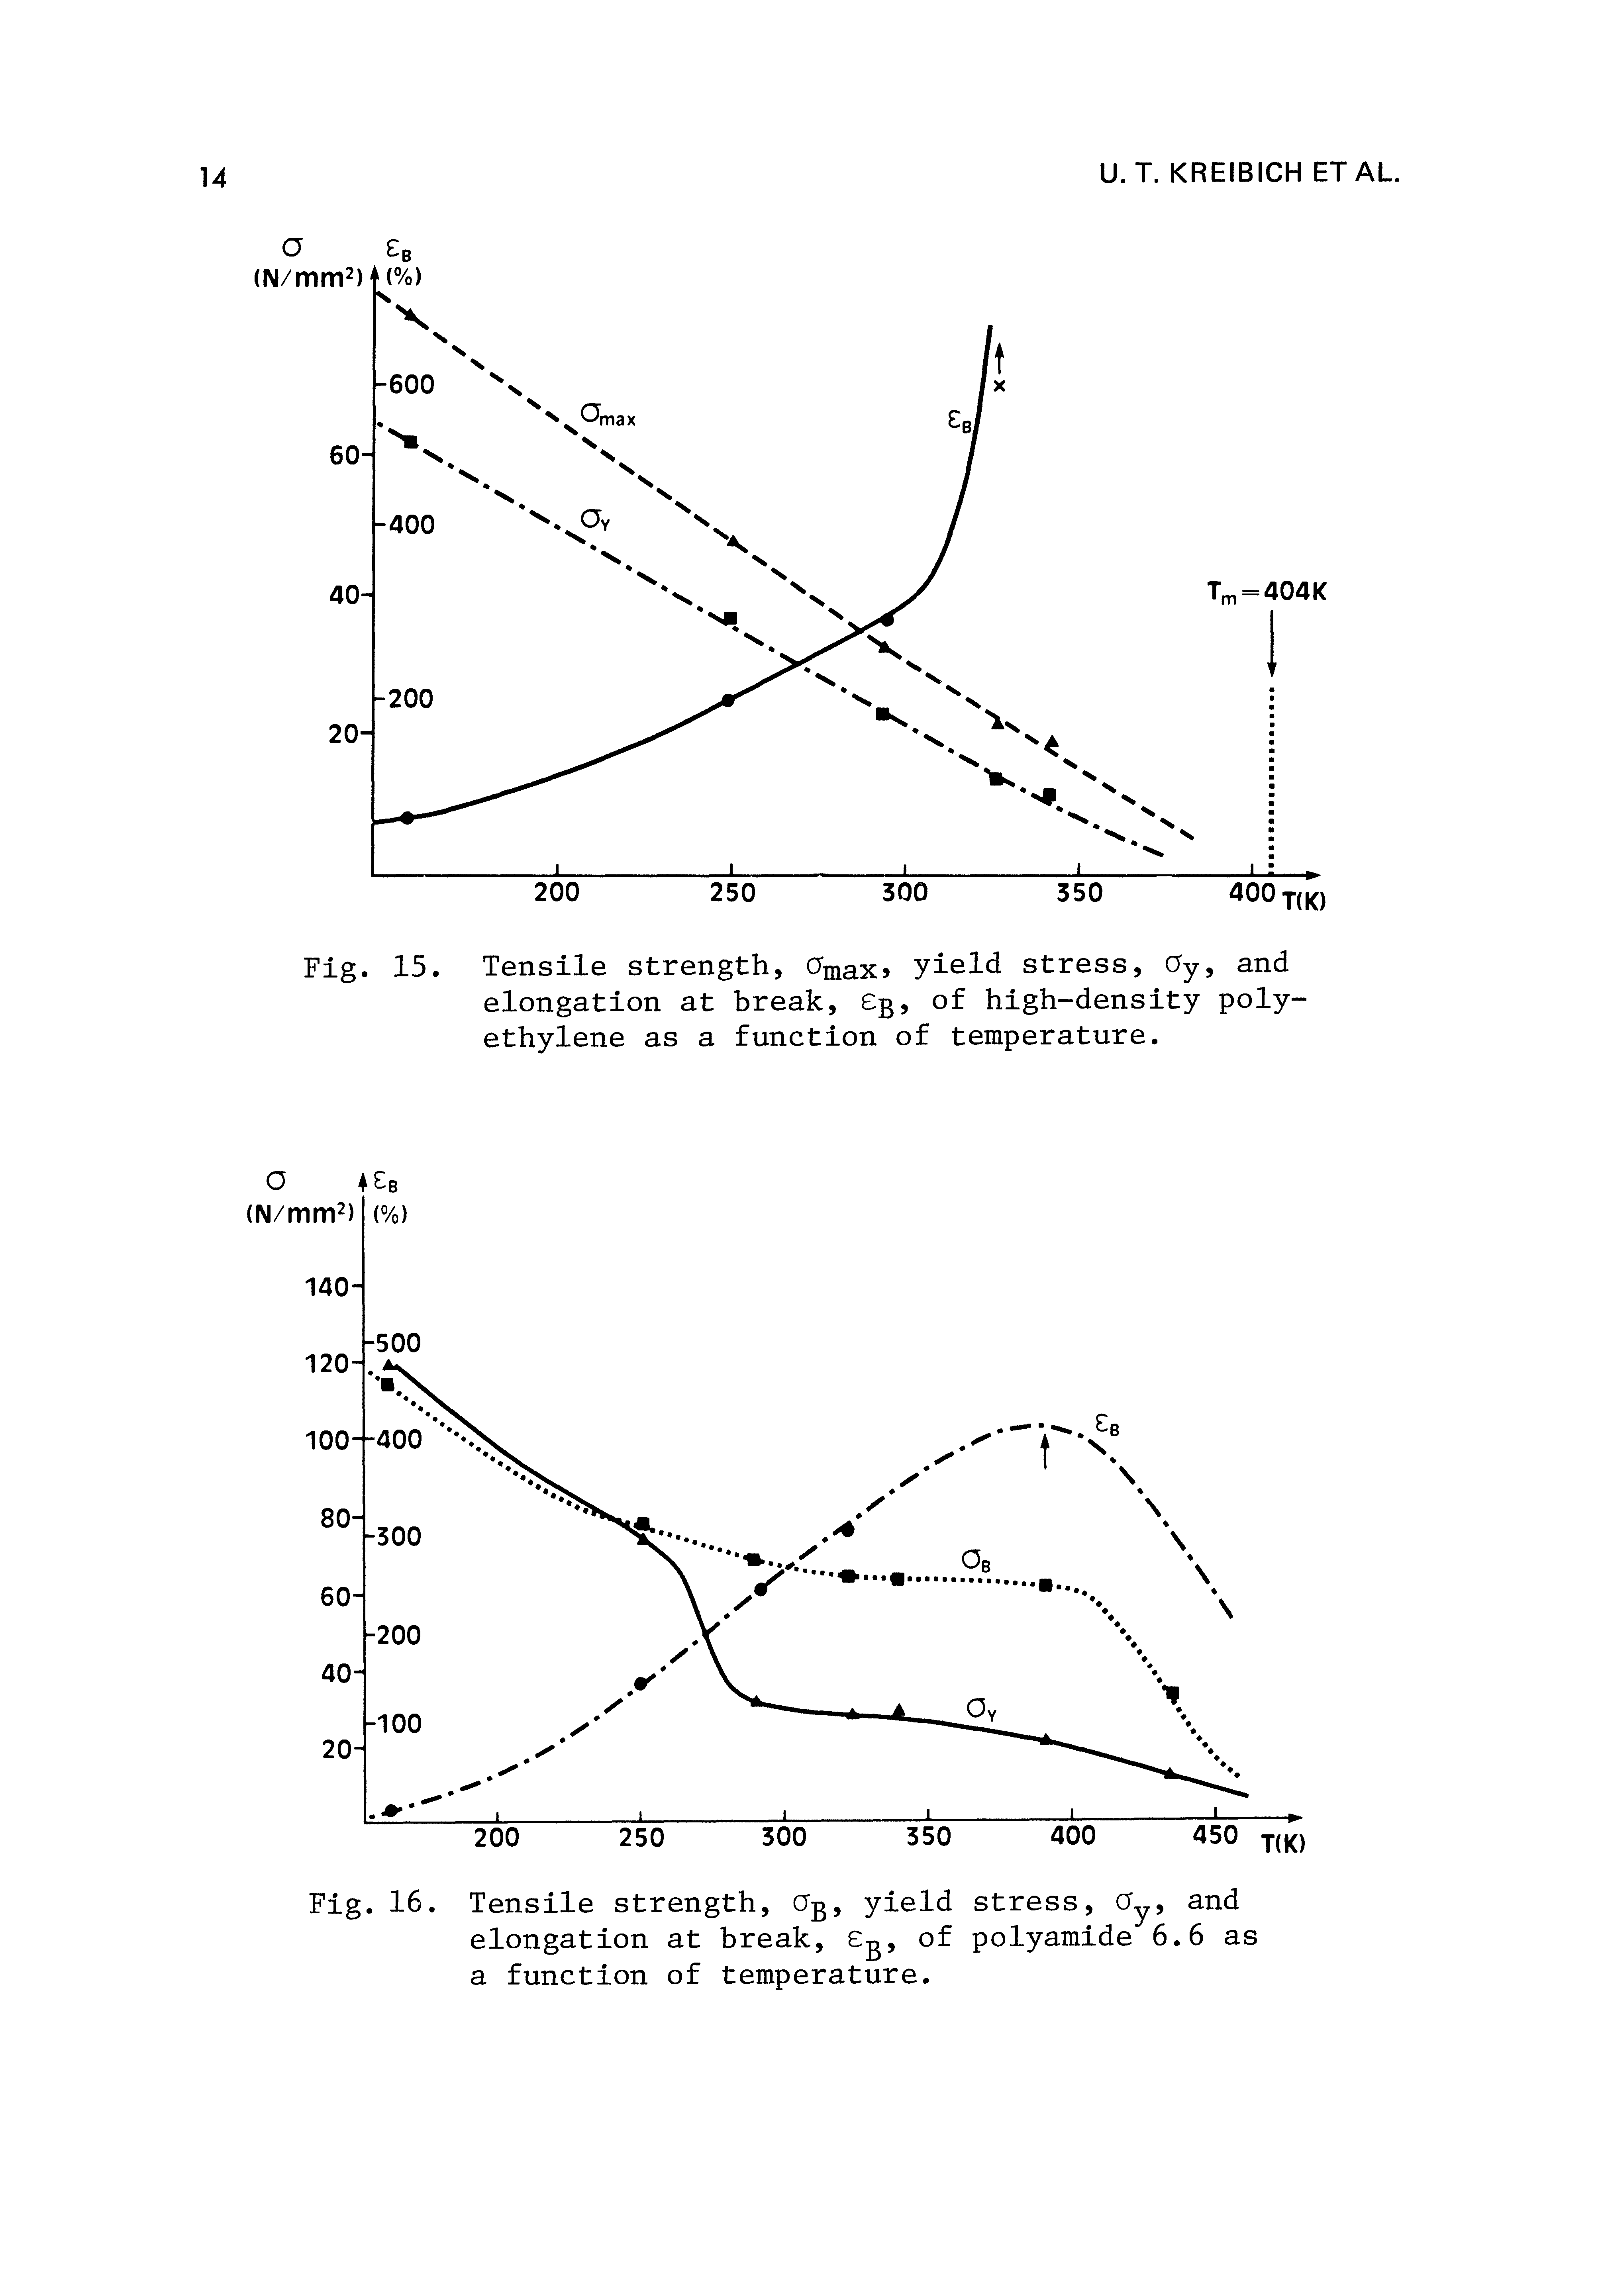 Fig. 15. Tensile strength, amax yield stress, Qy, and elongation at break, eg, of high-density polyethylene as a function of temperature.